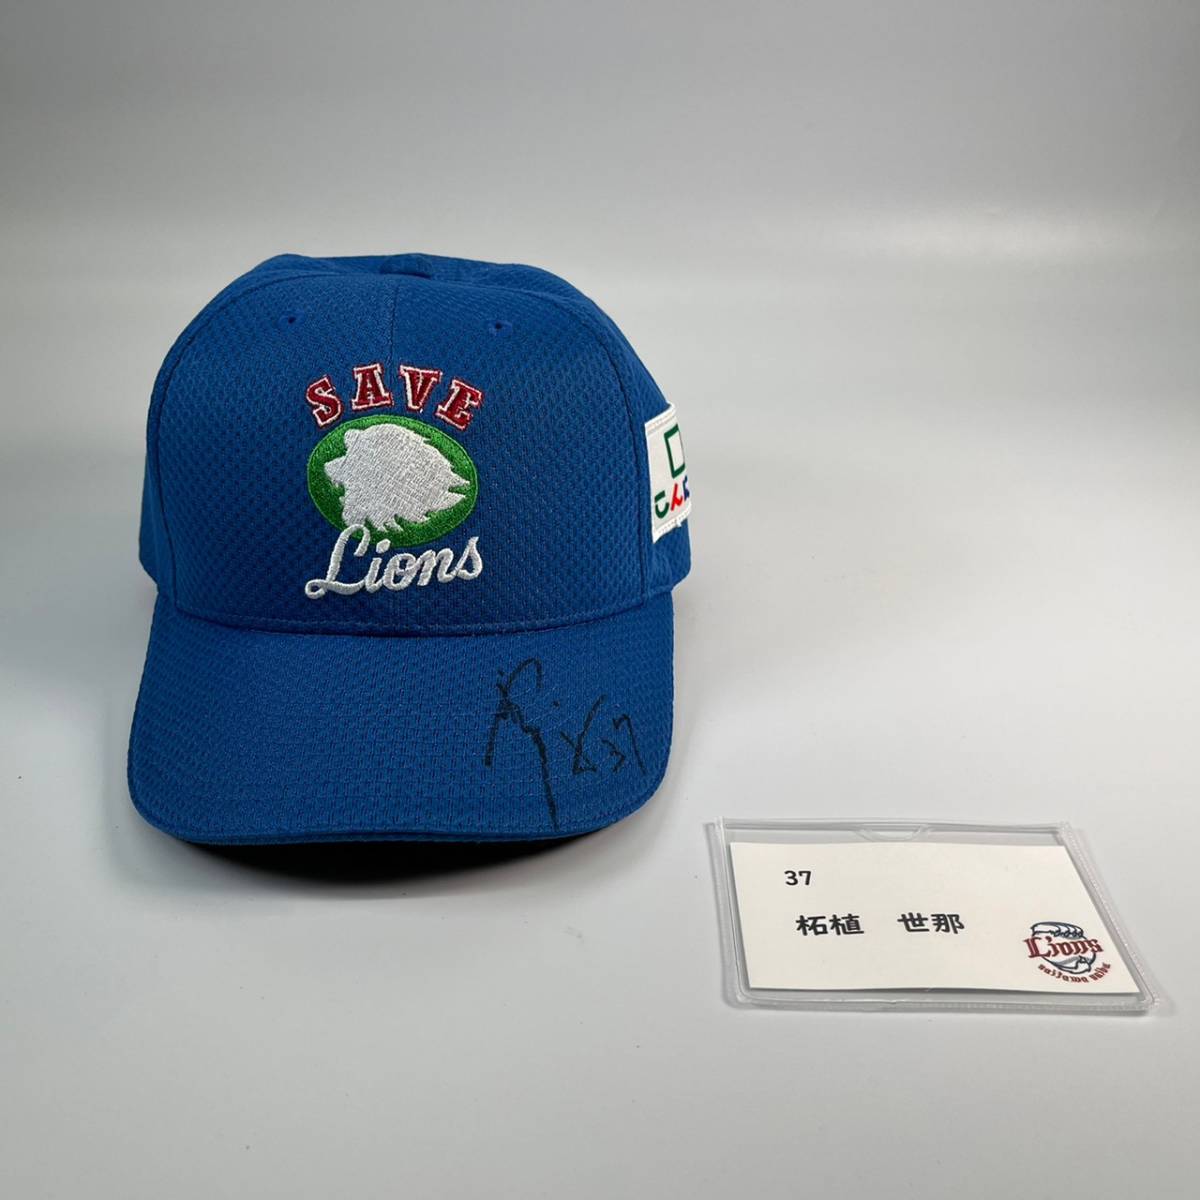 [ charity ] Saitama Seibu Lions Buxus microphylla .. player SAVE LIONS DAY cap ( with autograph )